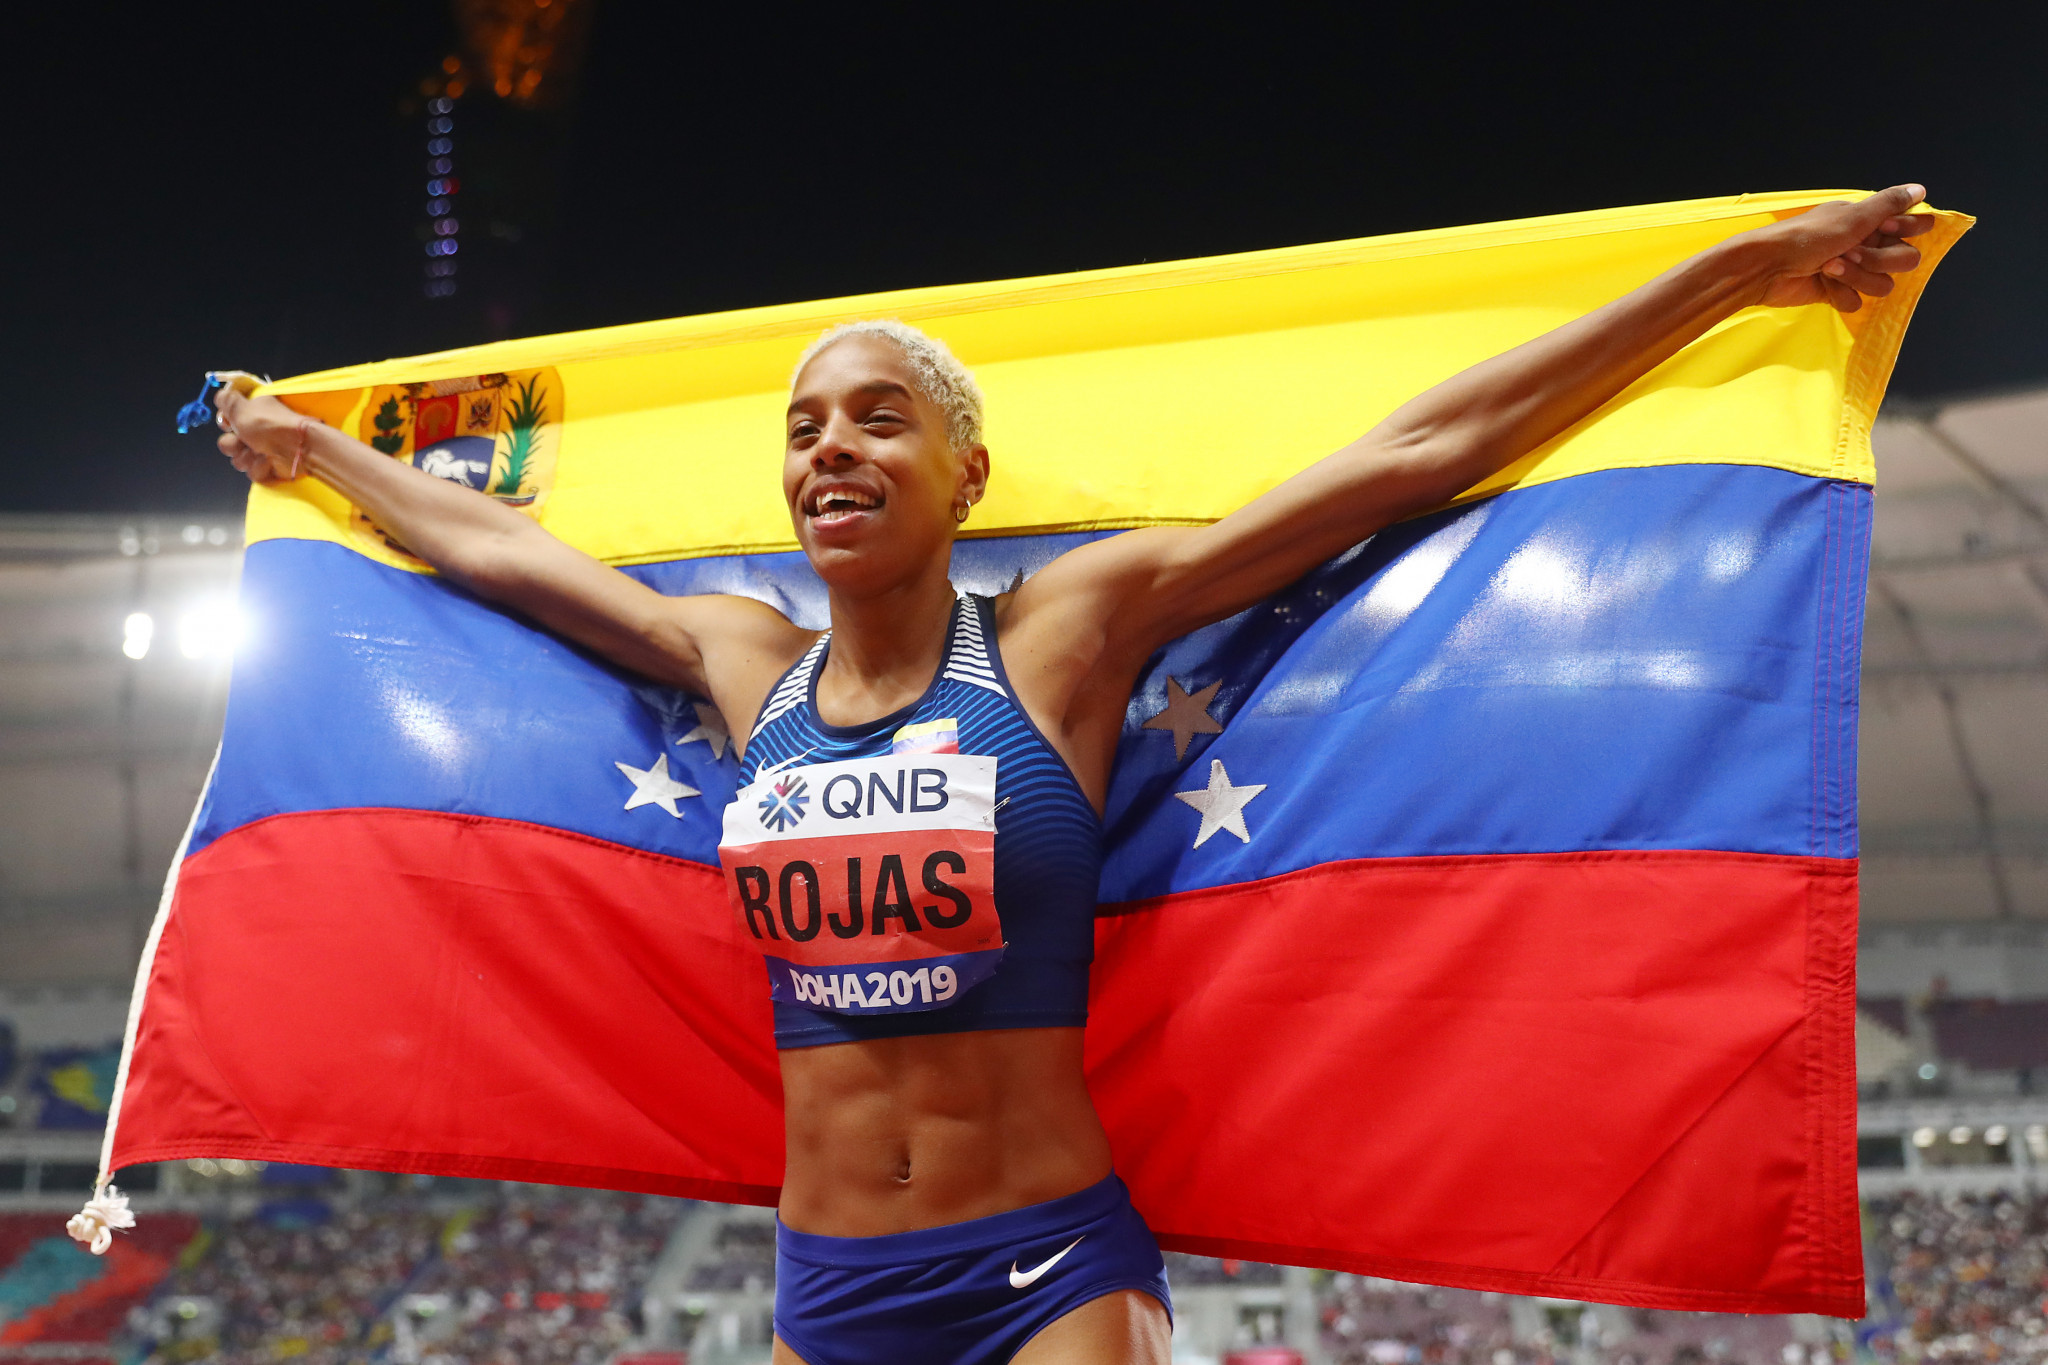 World champion triple jumper Yulimar Rojas spoke at the Venezuelan Olympic Committee meeting ©Getty Images